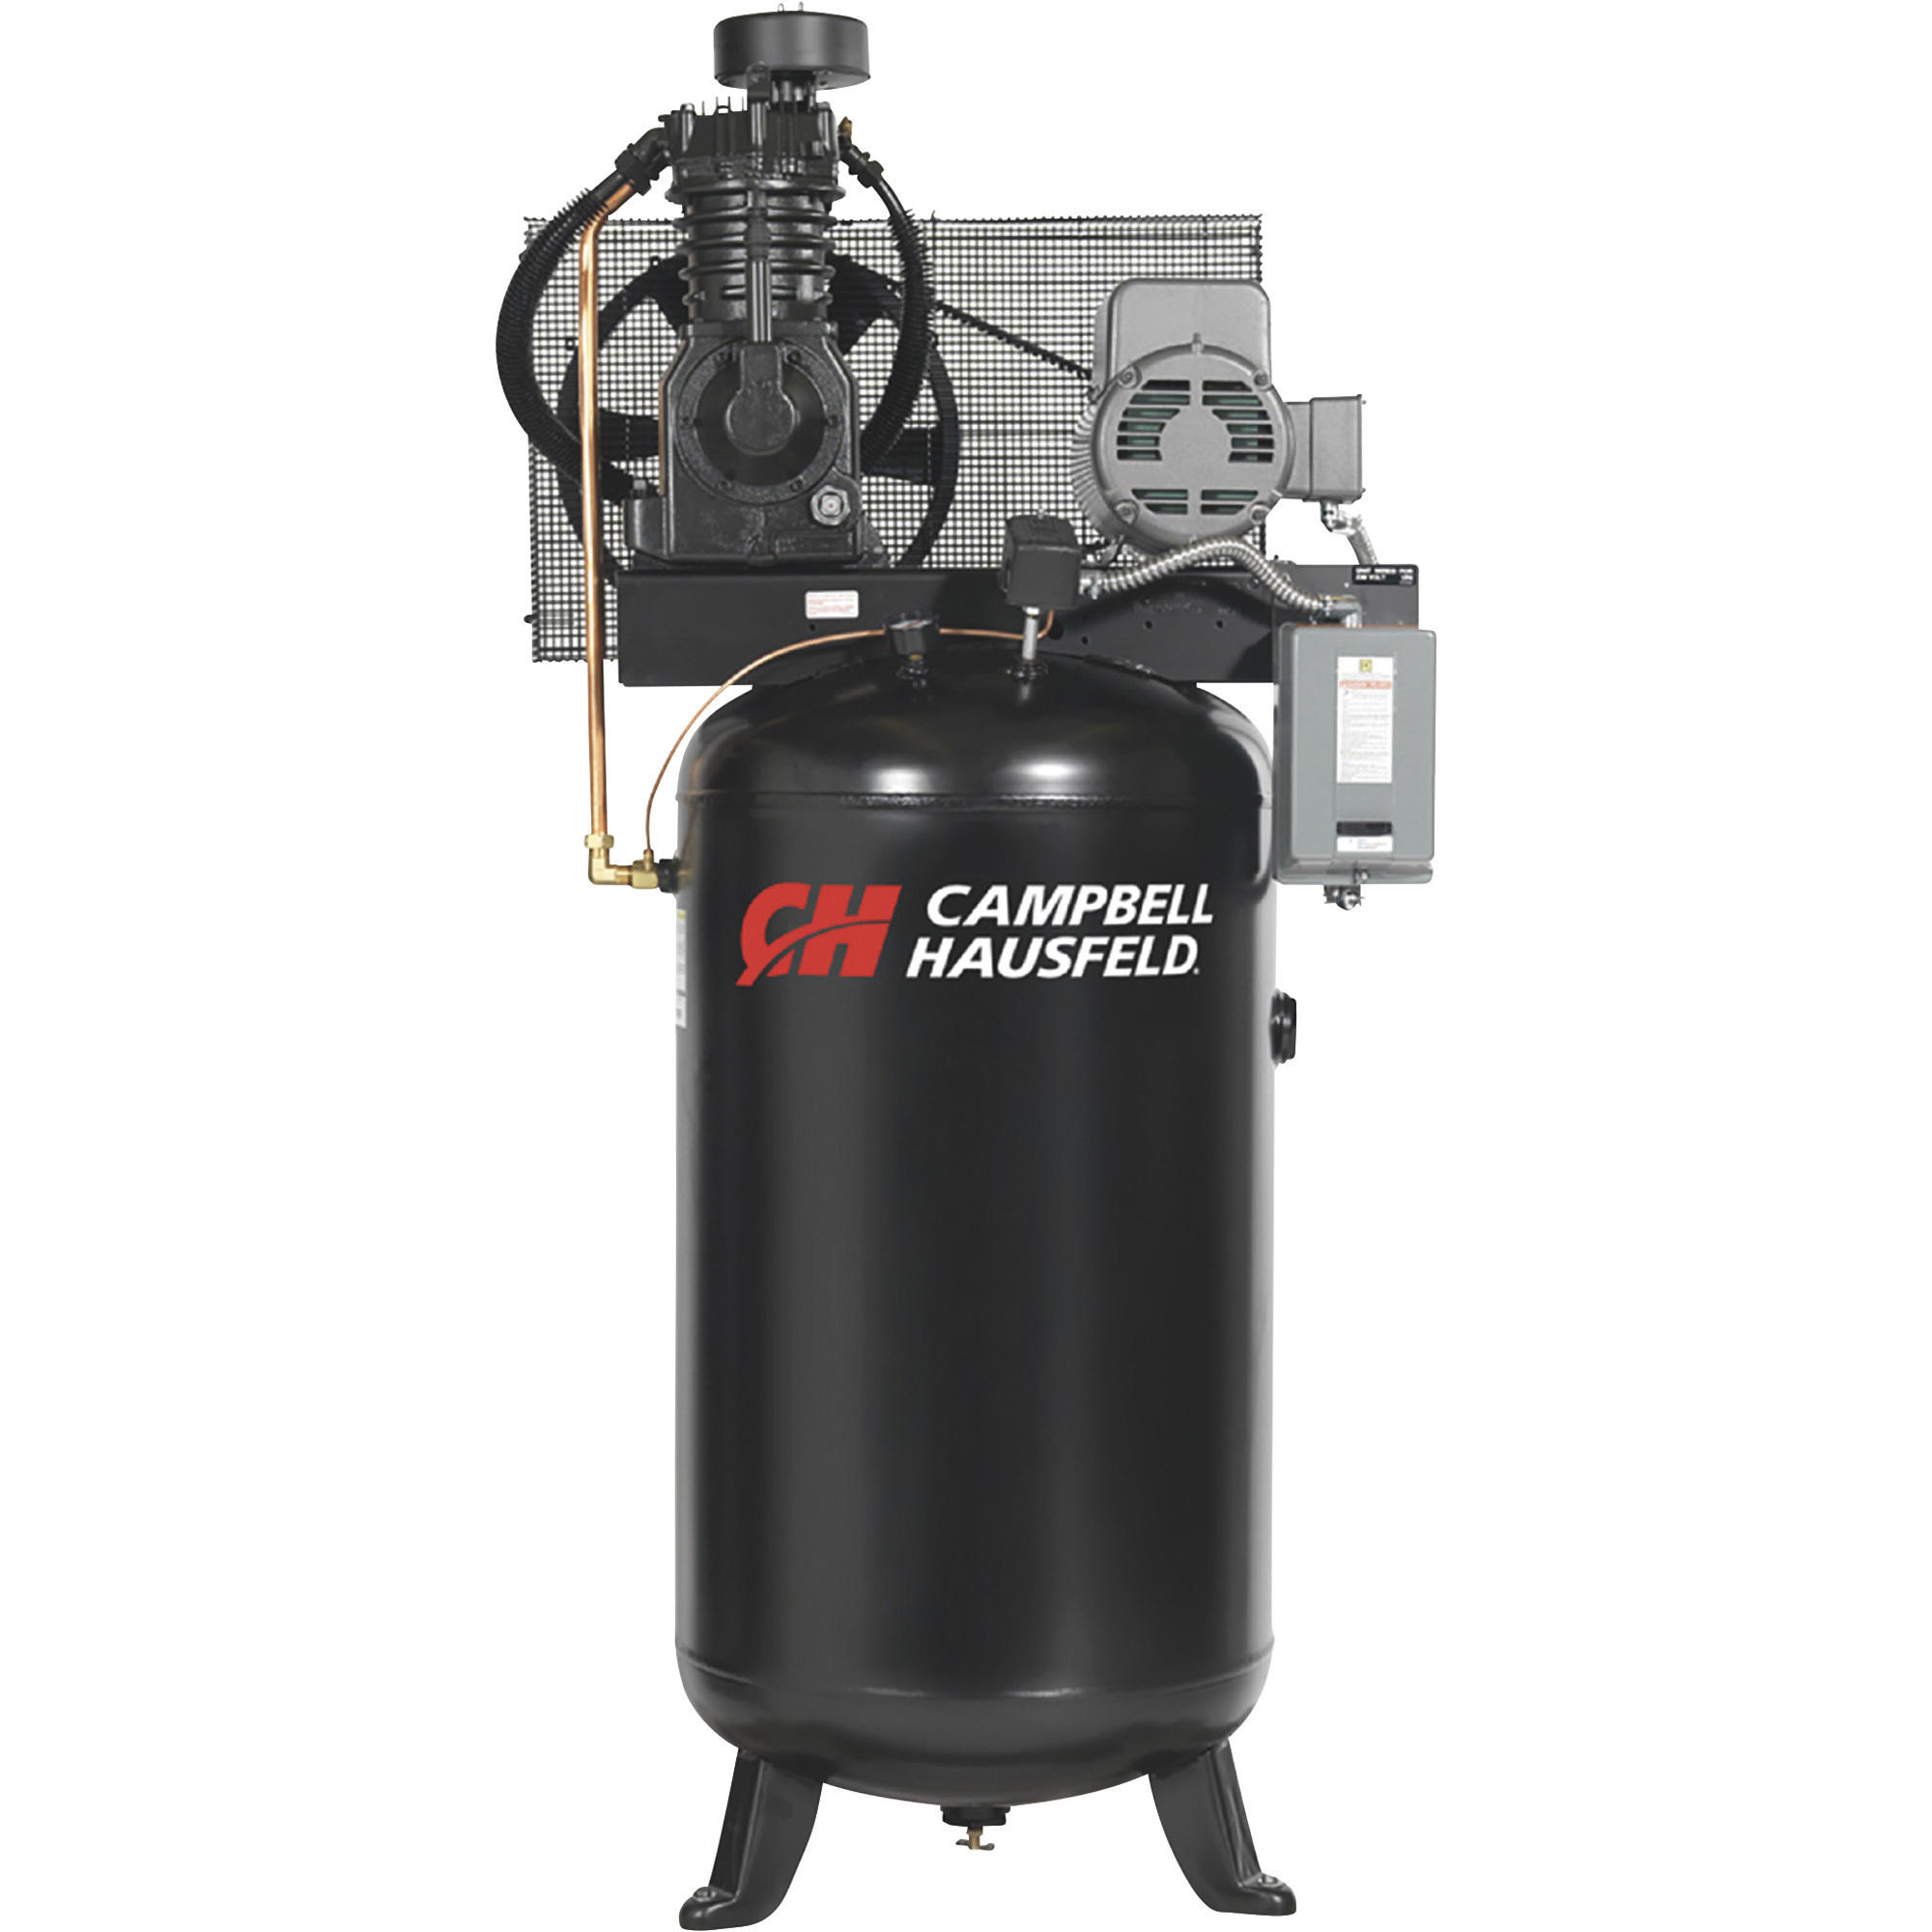 Campbell Hausfeld Two-Stage Air Compressor, 5 HP, 208-230/460 Volt, 3 Phase, 80 Gallon, 16.6 CFM @ 175 PSI, Model CE7051